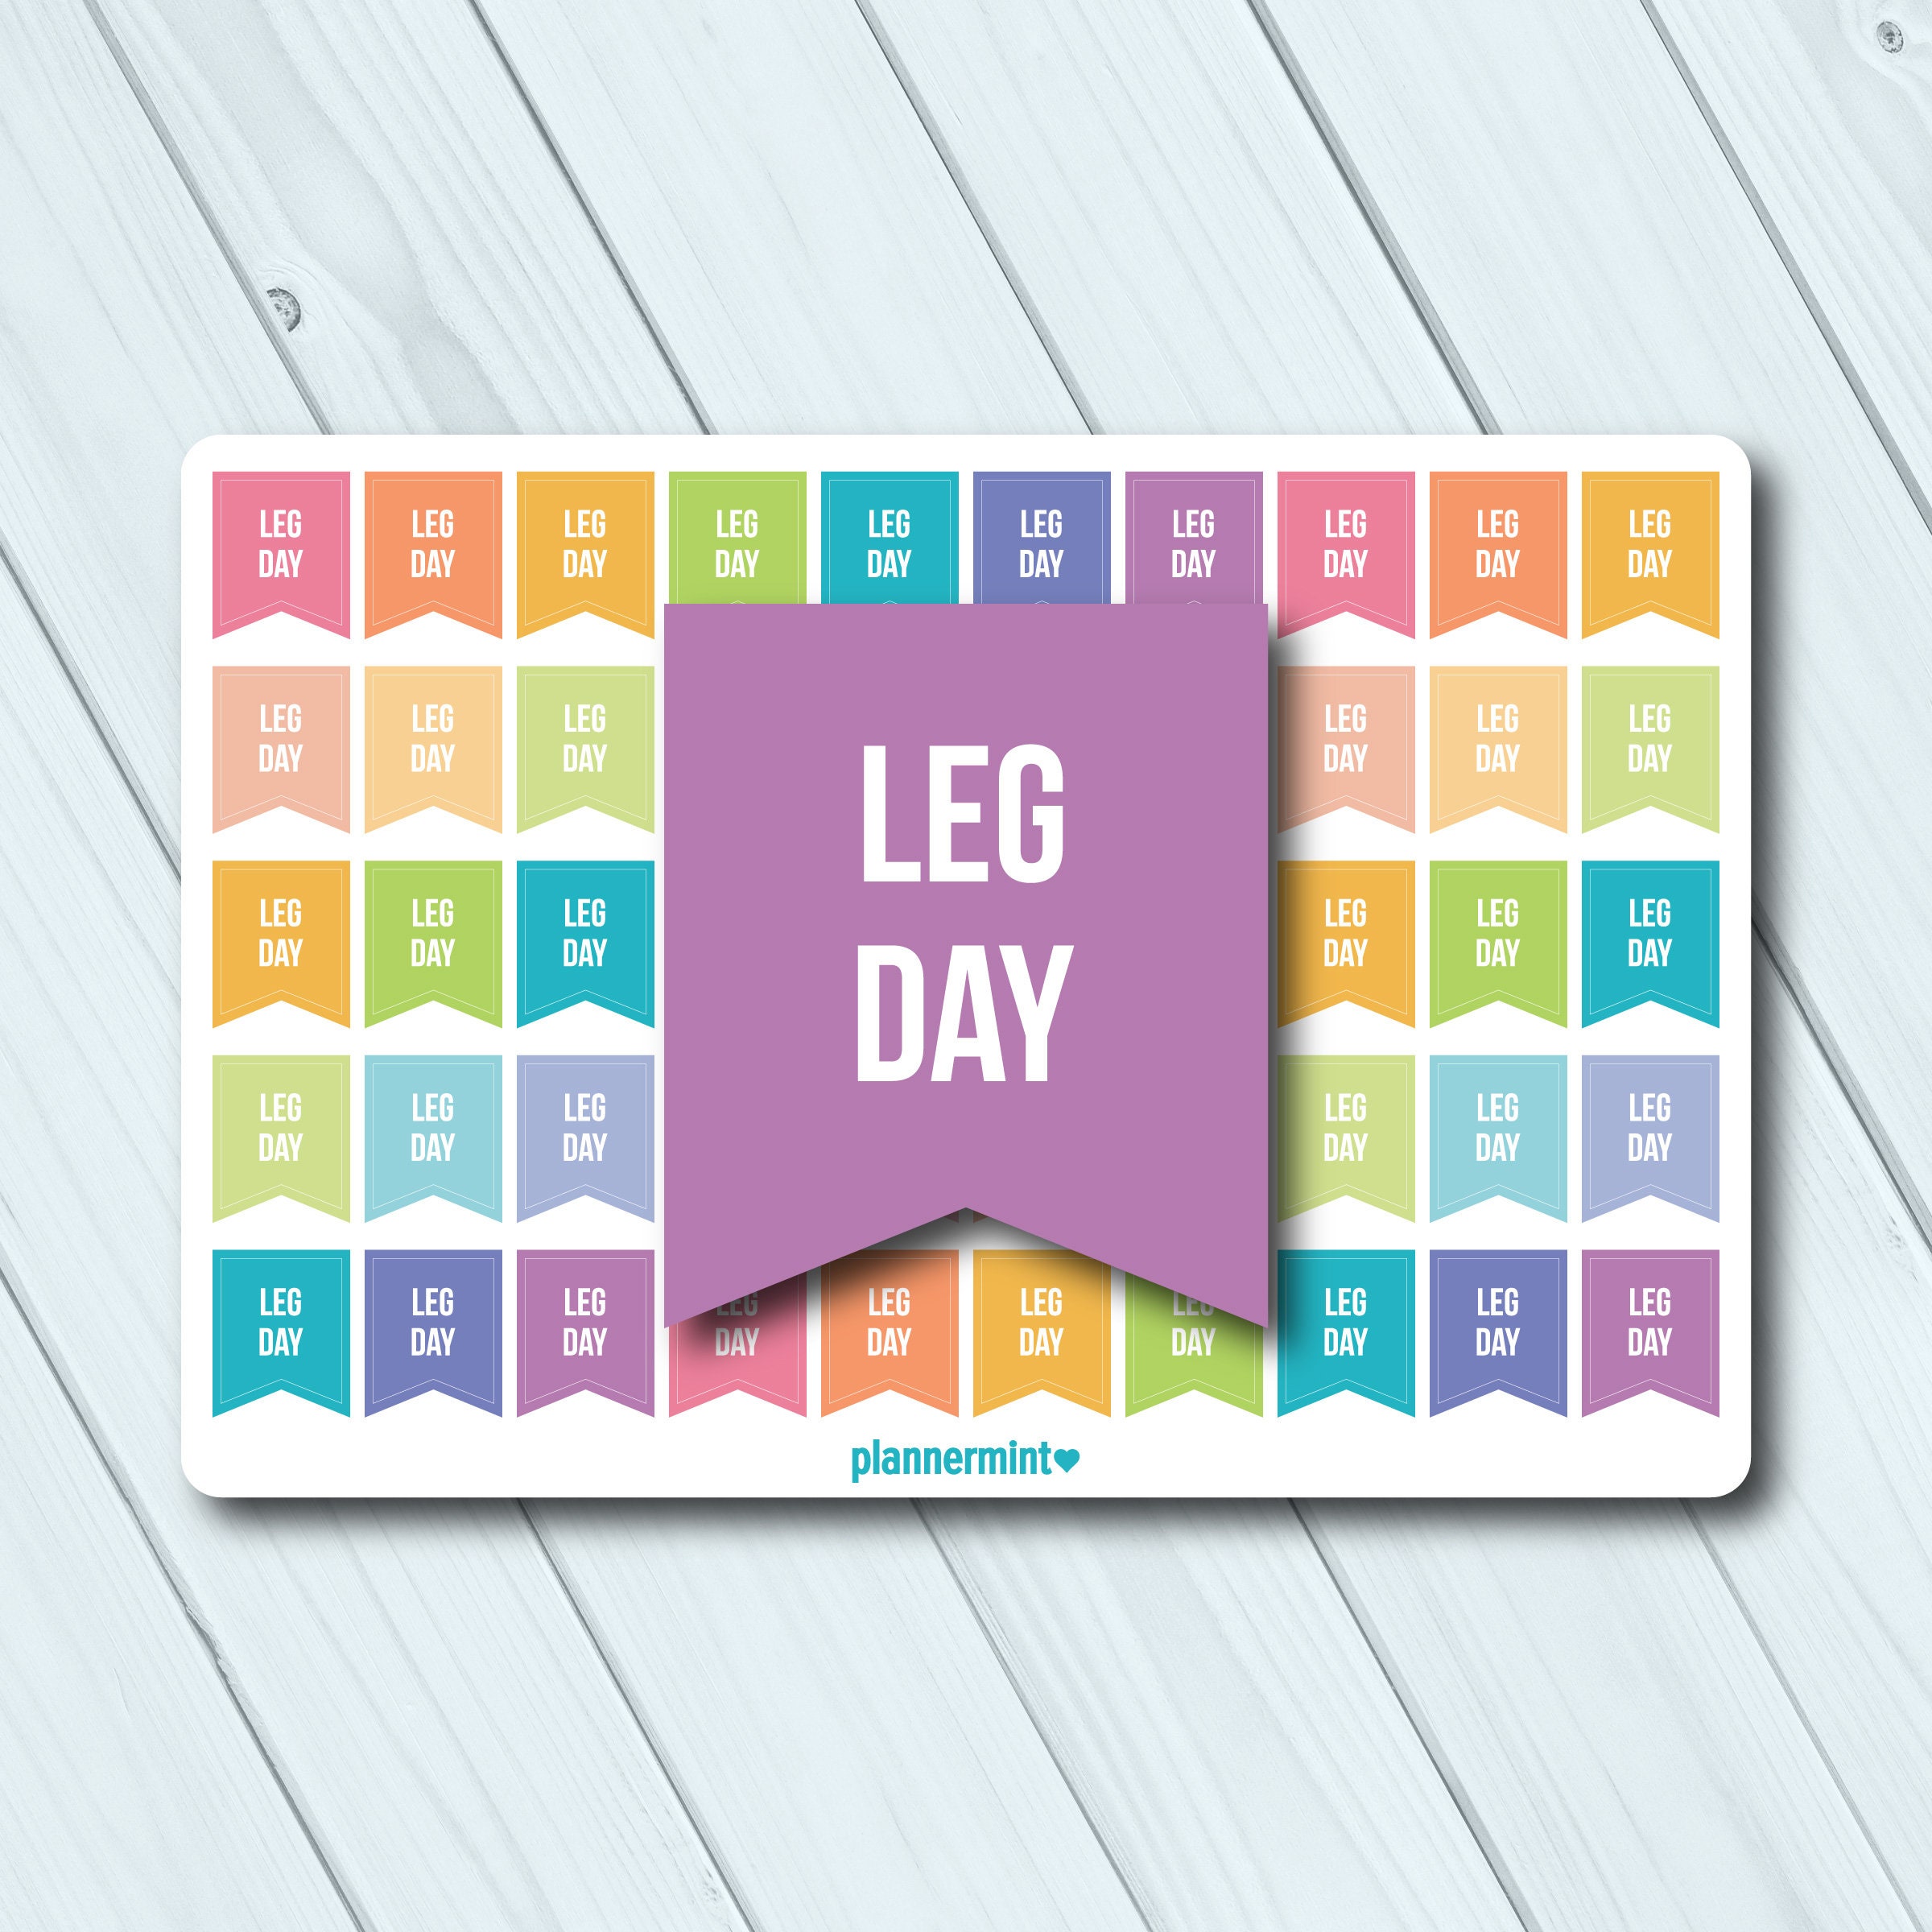 8 fun stickers for different messages on legs.